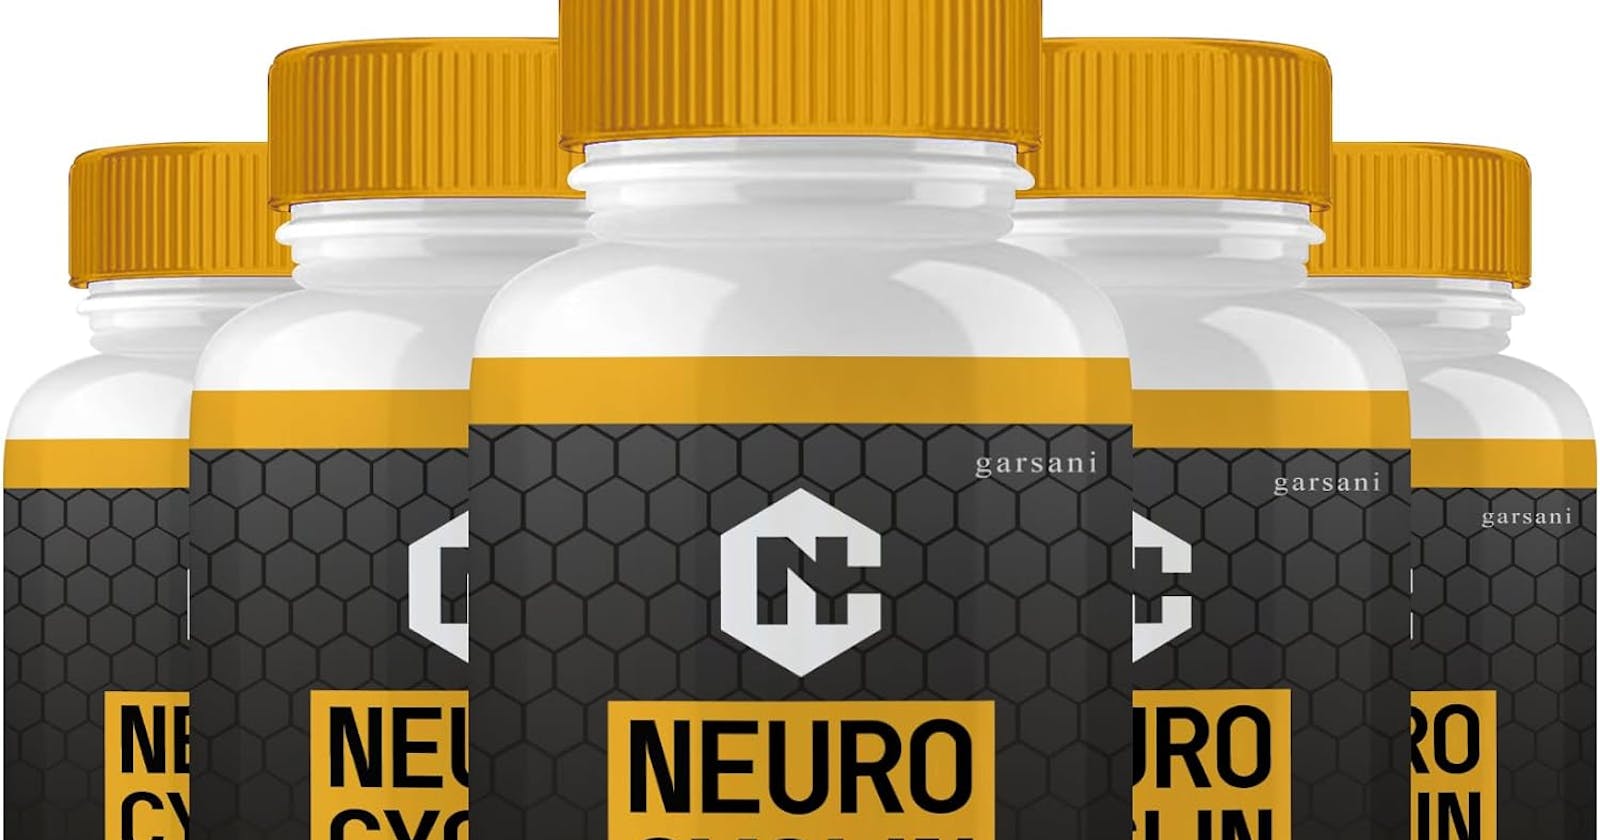 Neurocyclin Does It Effective or Trusted? (CA)